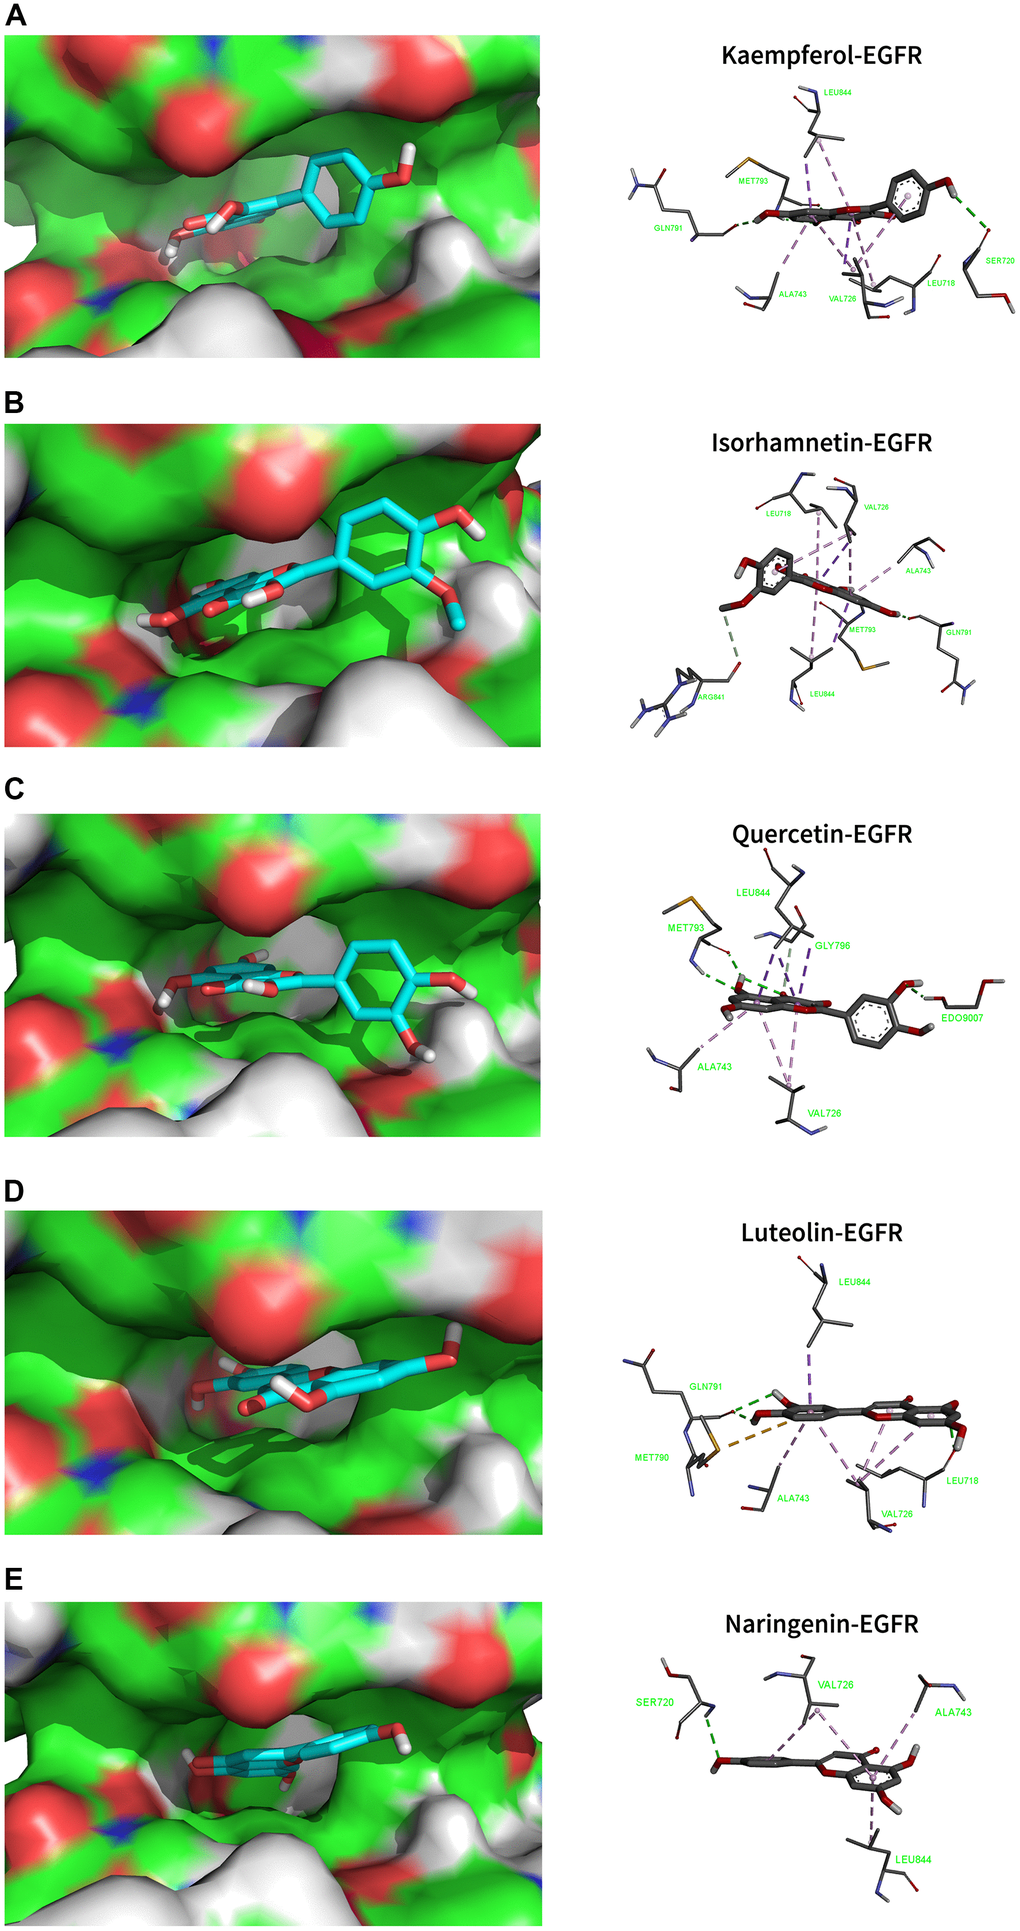 Molecular docking models that combined the main active ingredients with the core target EGFR. EGFR-PDB ID: 5UG9. Green dotted line: Conventional Hydrogen Bond; Light green dotted line: Carbon Hydrogen Bond; Purple dotted line: Pi Sigma; Light purple dotted line: Pi Alkyl. (A) Kaempferol. (B) Isorhamnetin. (C) Quercetin. (D) Luteolin. (E) Naringenin.